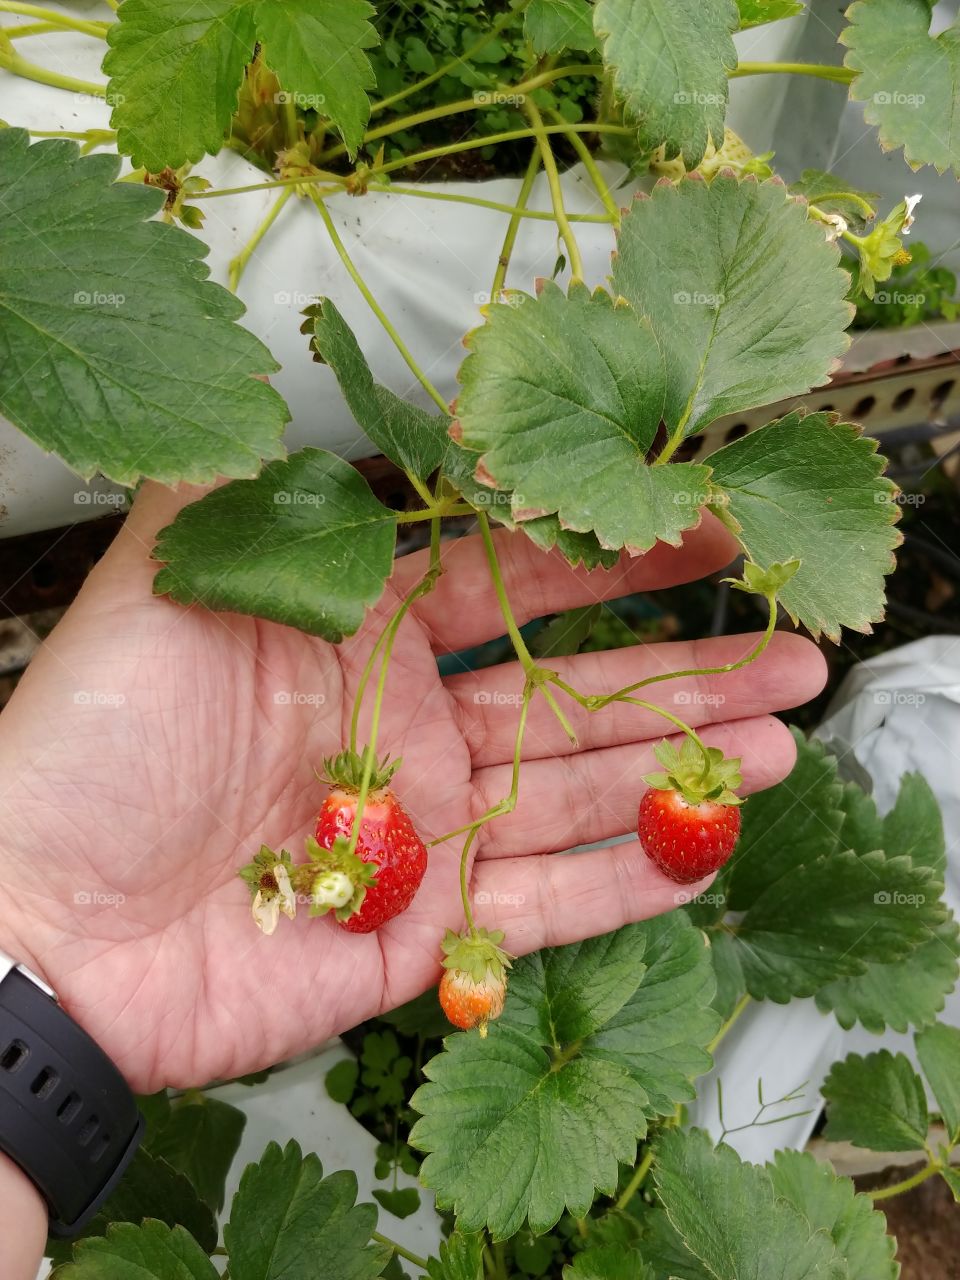 strawberry orchards. fruits about to ripen